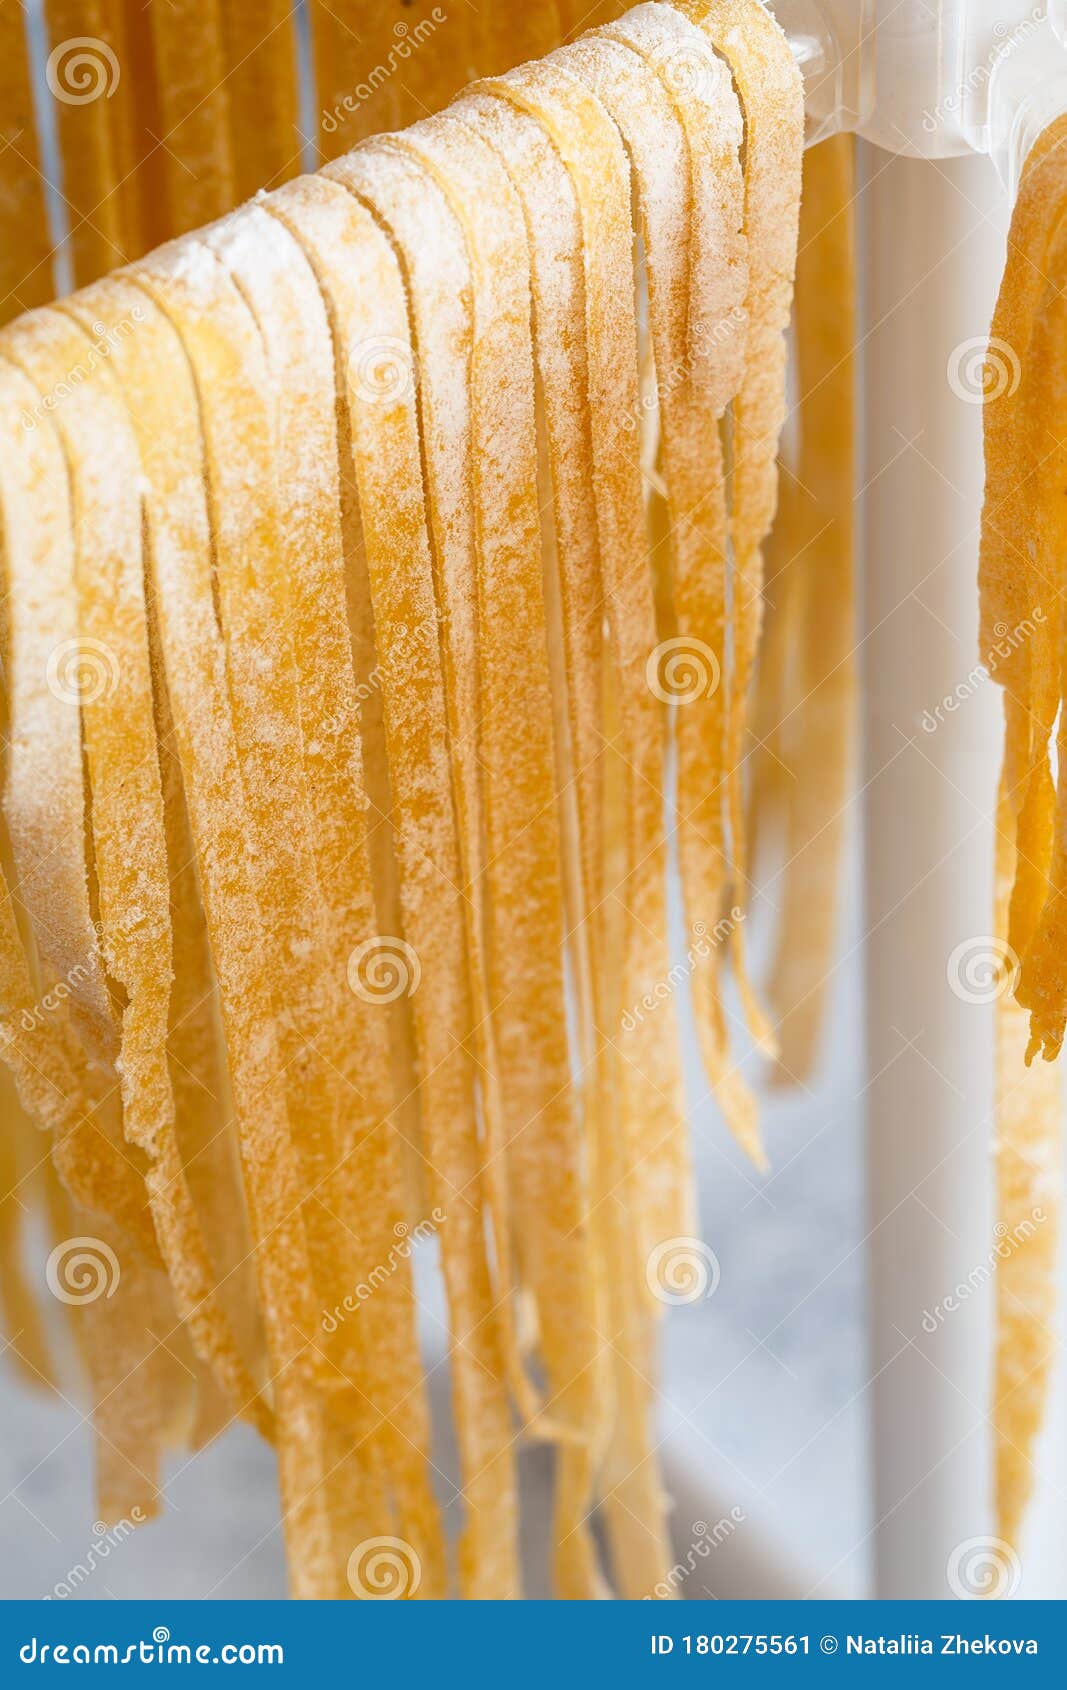 Homemade Italian Tagliatelle Hanging On A Pasta Drying Rack Fresh Noodle Drying On Drying Rack Self Made Spaghetti Drying On A Stock Image Image Of Fresh Equipment 180275561